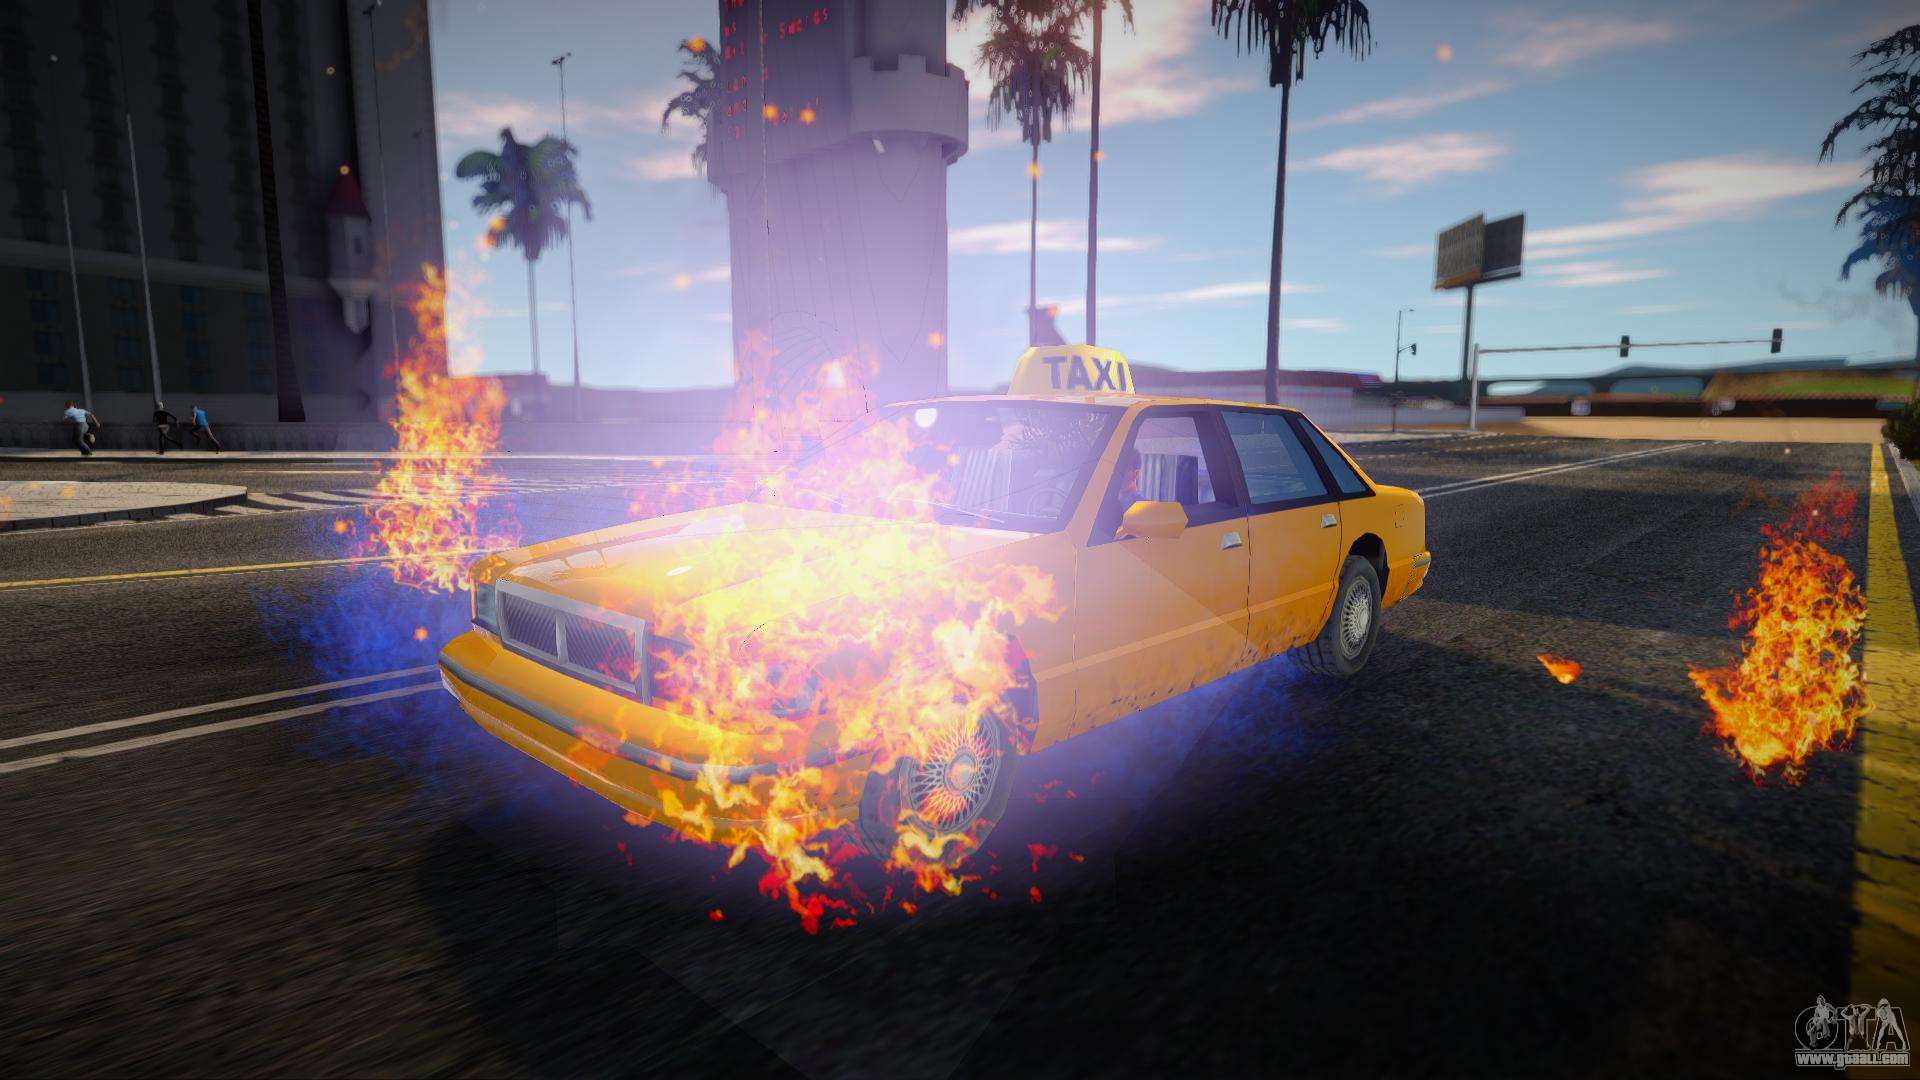 Cheats for GTA 5 - Unofficial for Android - Download